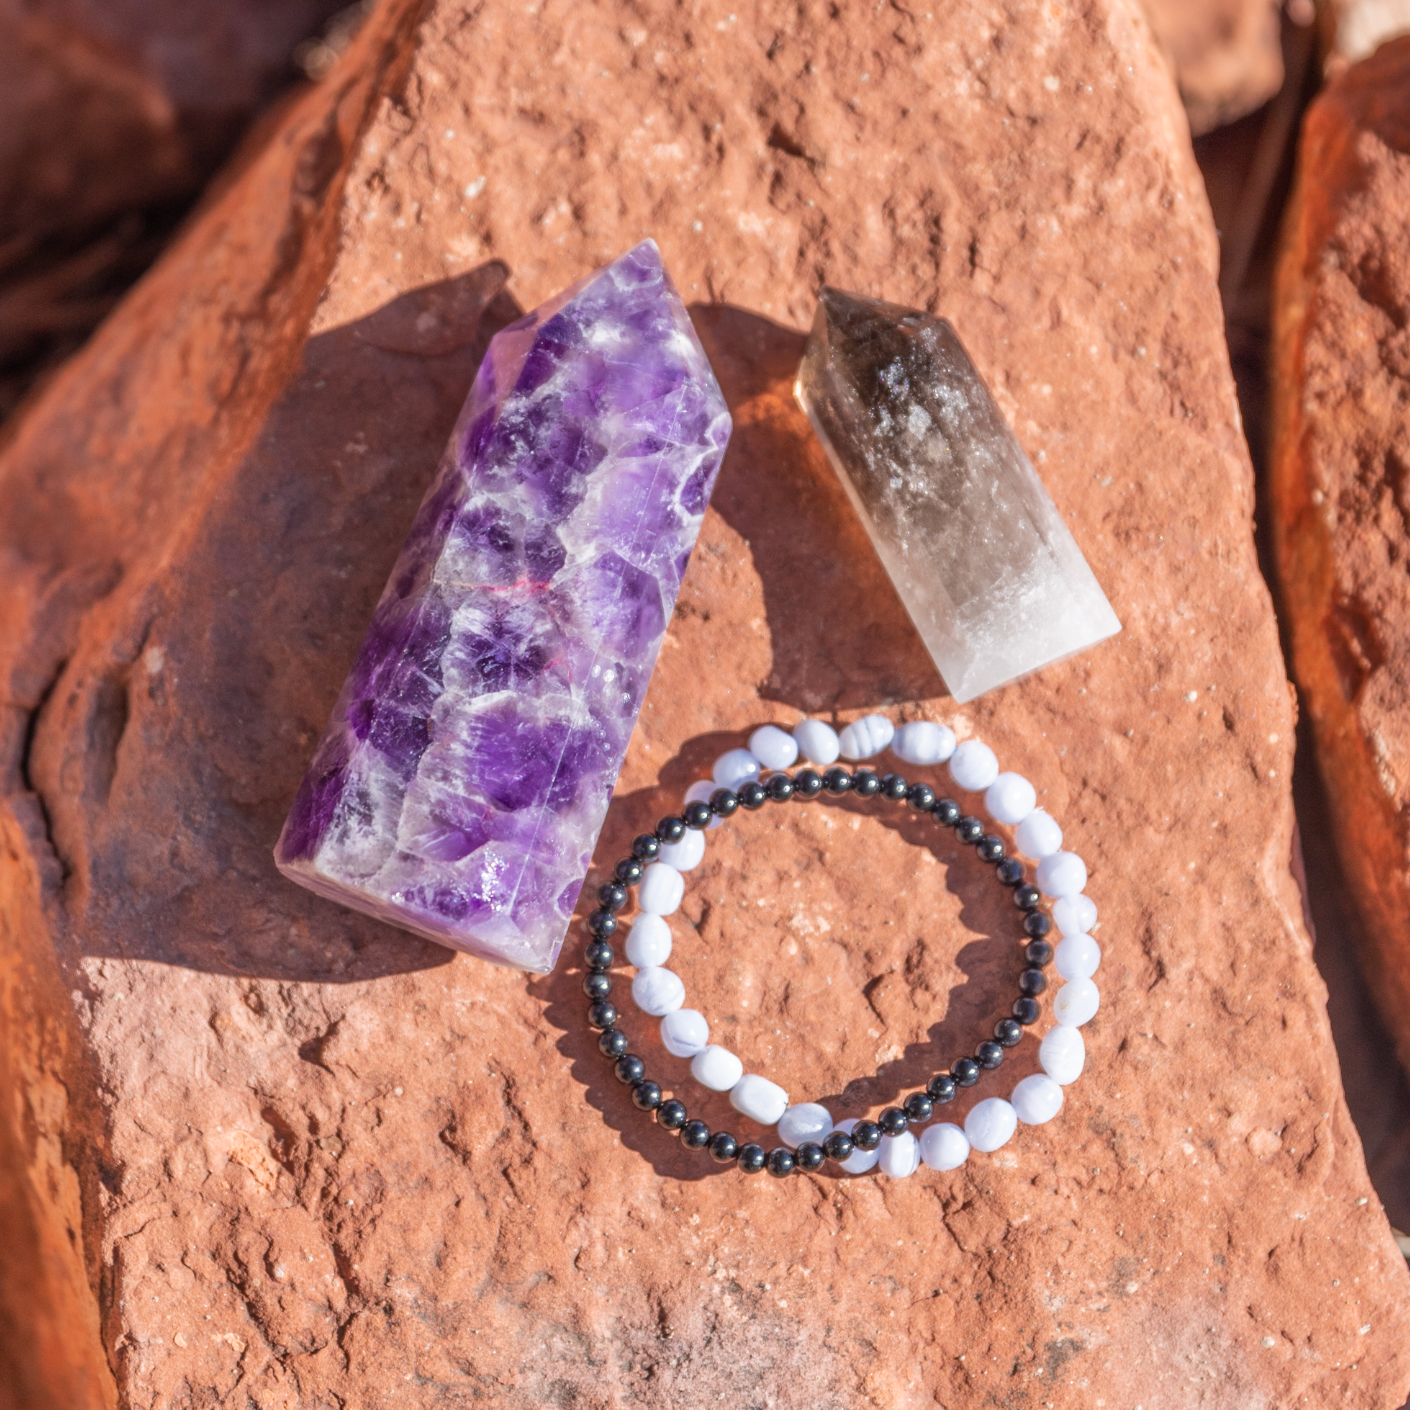 healing crystals: a bundle of crystals used for anxiety and stress relief in sedona, arizona